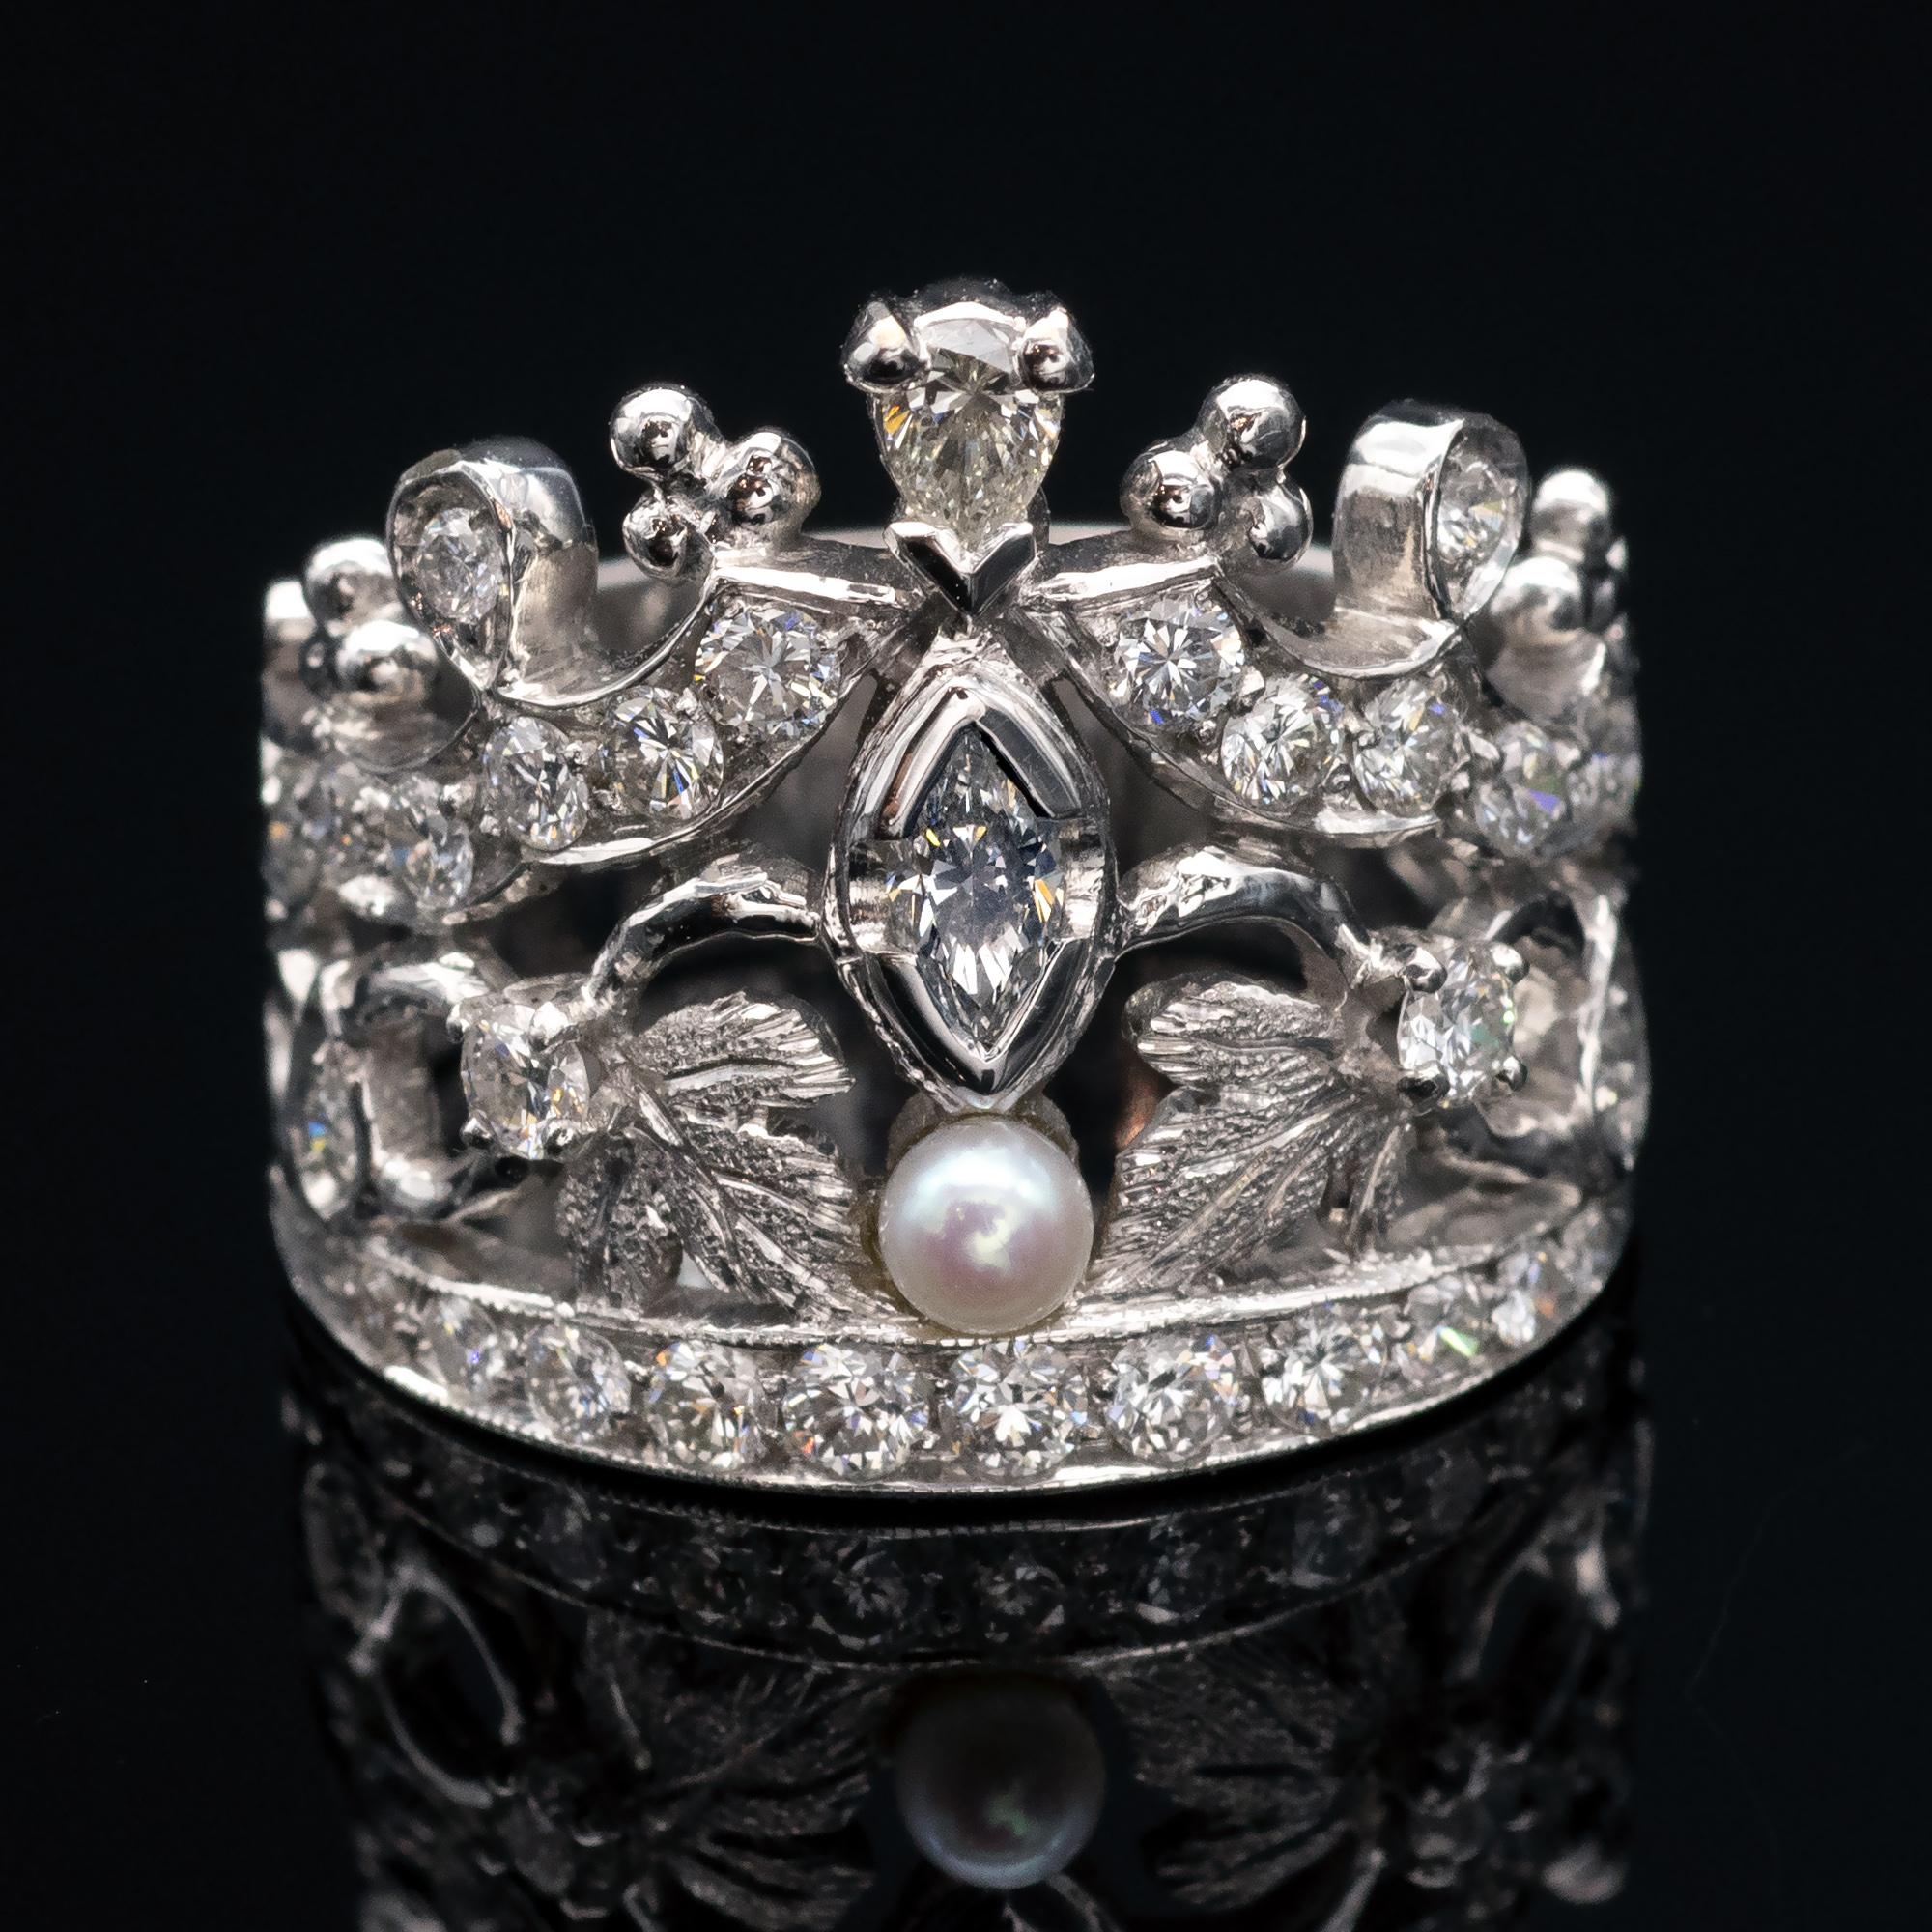 Exquisite crown shape ring.  White Gold and diamonds while two delicately engraved leaves seem to hold a small pearl.

Details:  
Ring Size: 7 ¼ (US), 55 (European). The resizing , is free of charge.
Diamond weight: 1.1 ct, French Hallmark